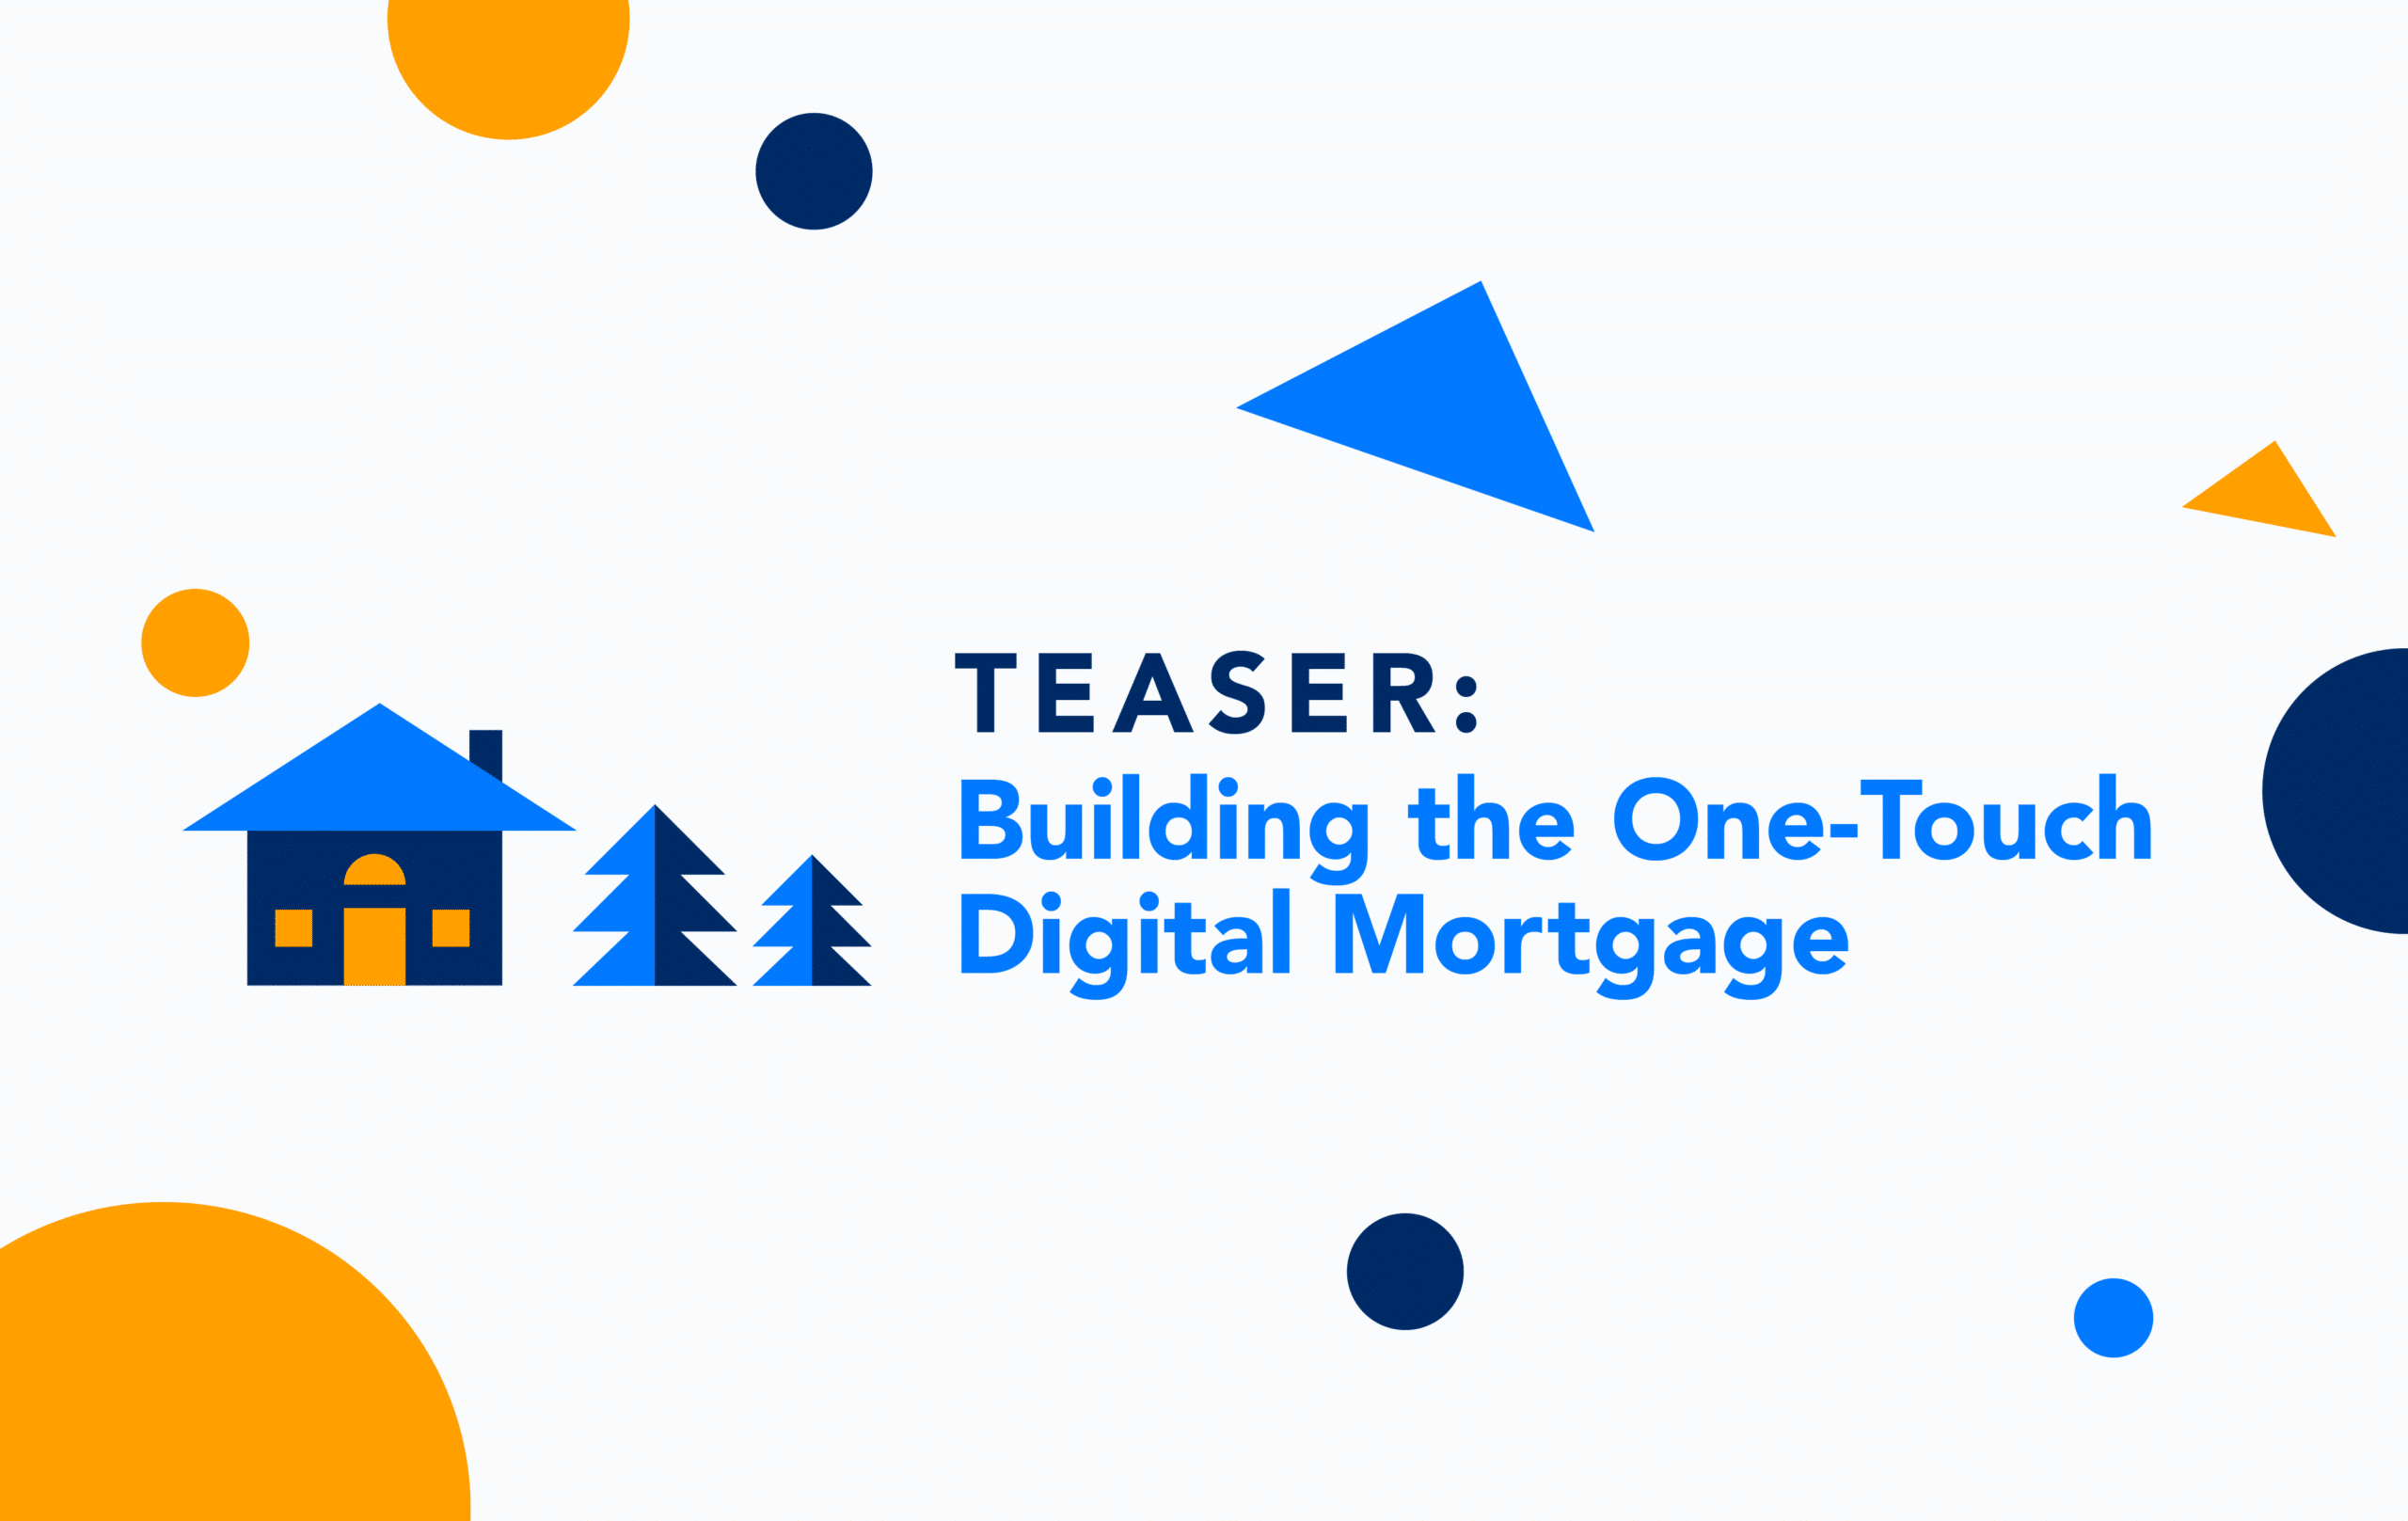 Teaser: Building the One-Touch Digital Mortgage